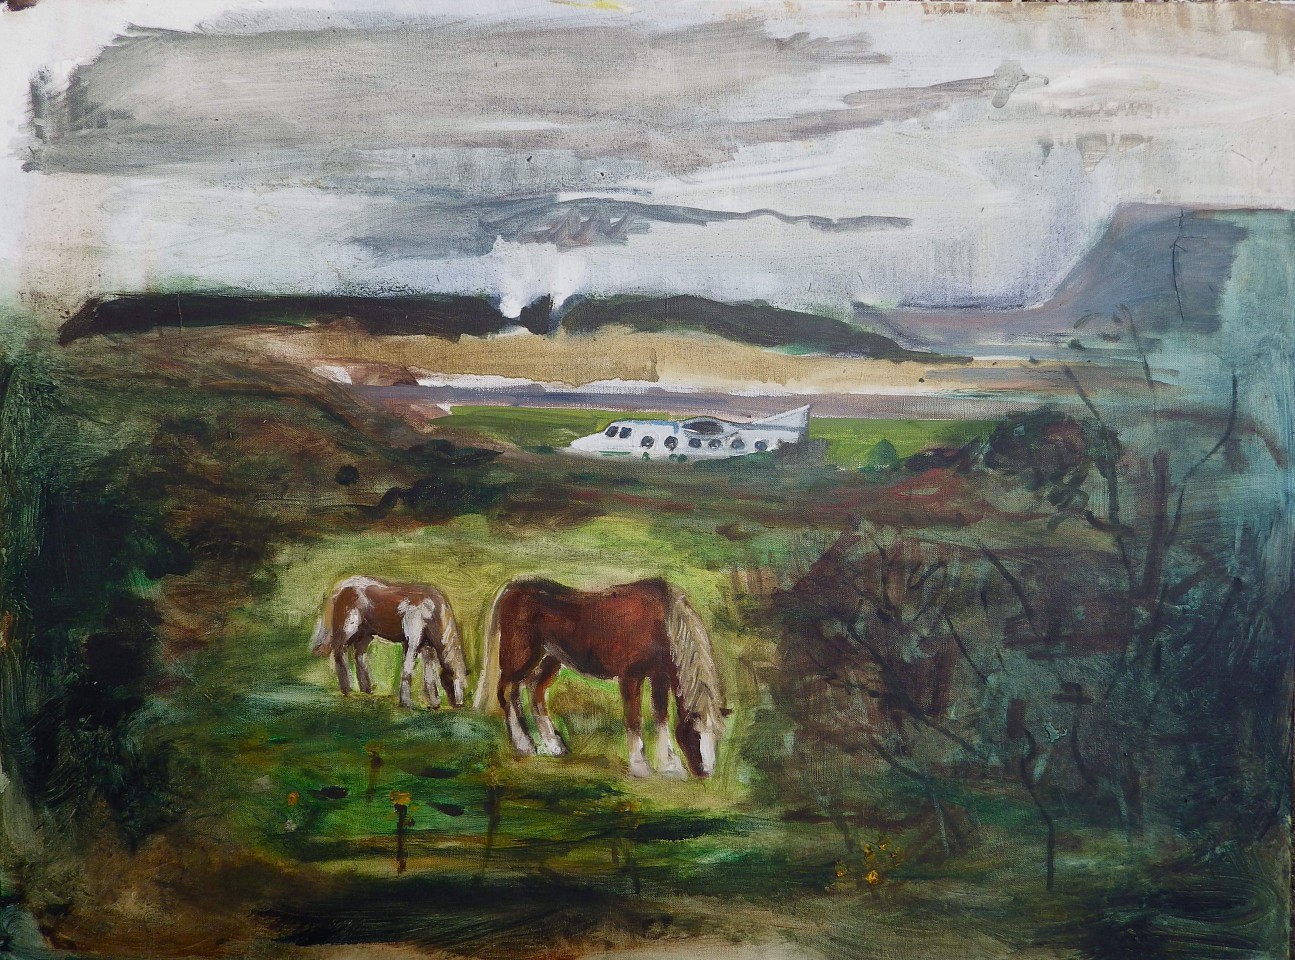 Andy Parsons
View of Standhill Airport from the Trading Estate, 2011-14
oil on canvas, 40 x 36 in.